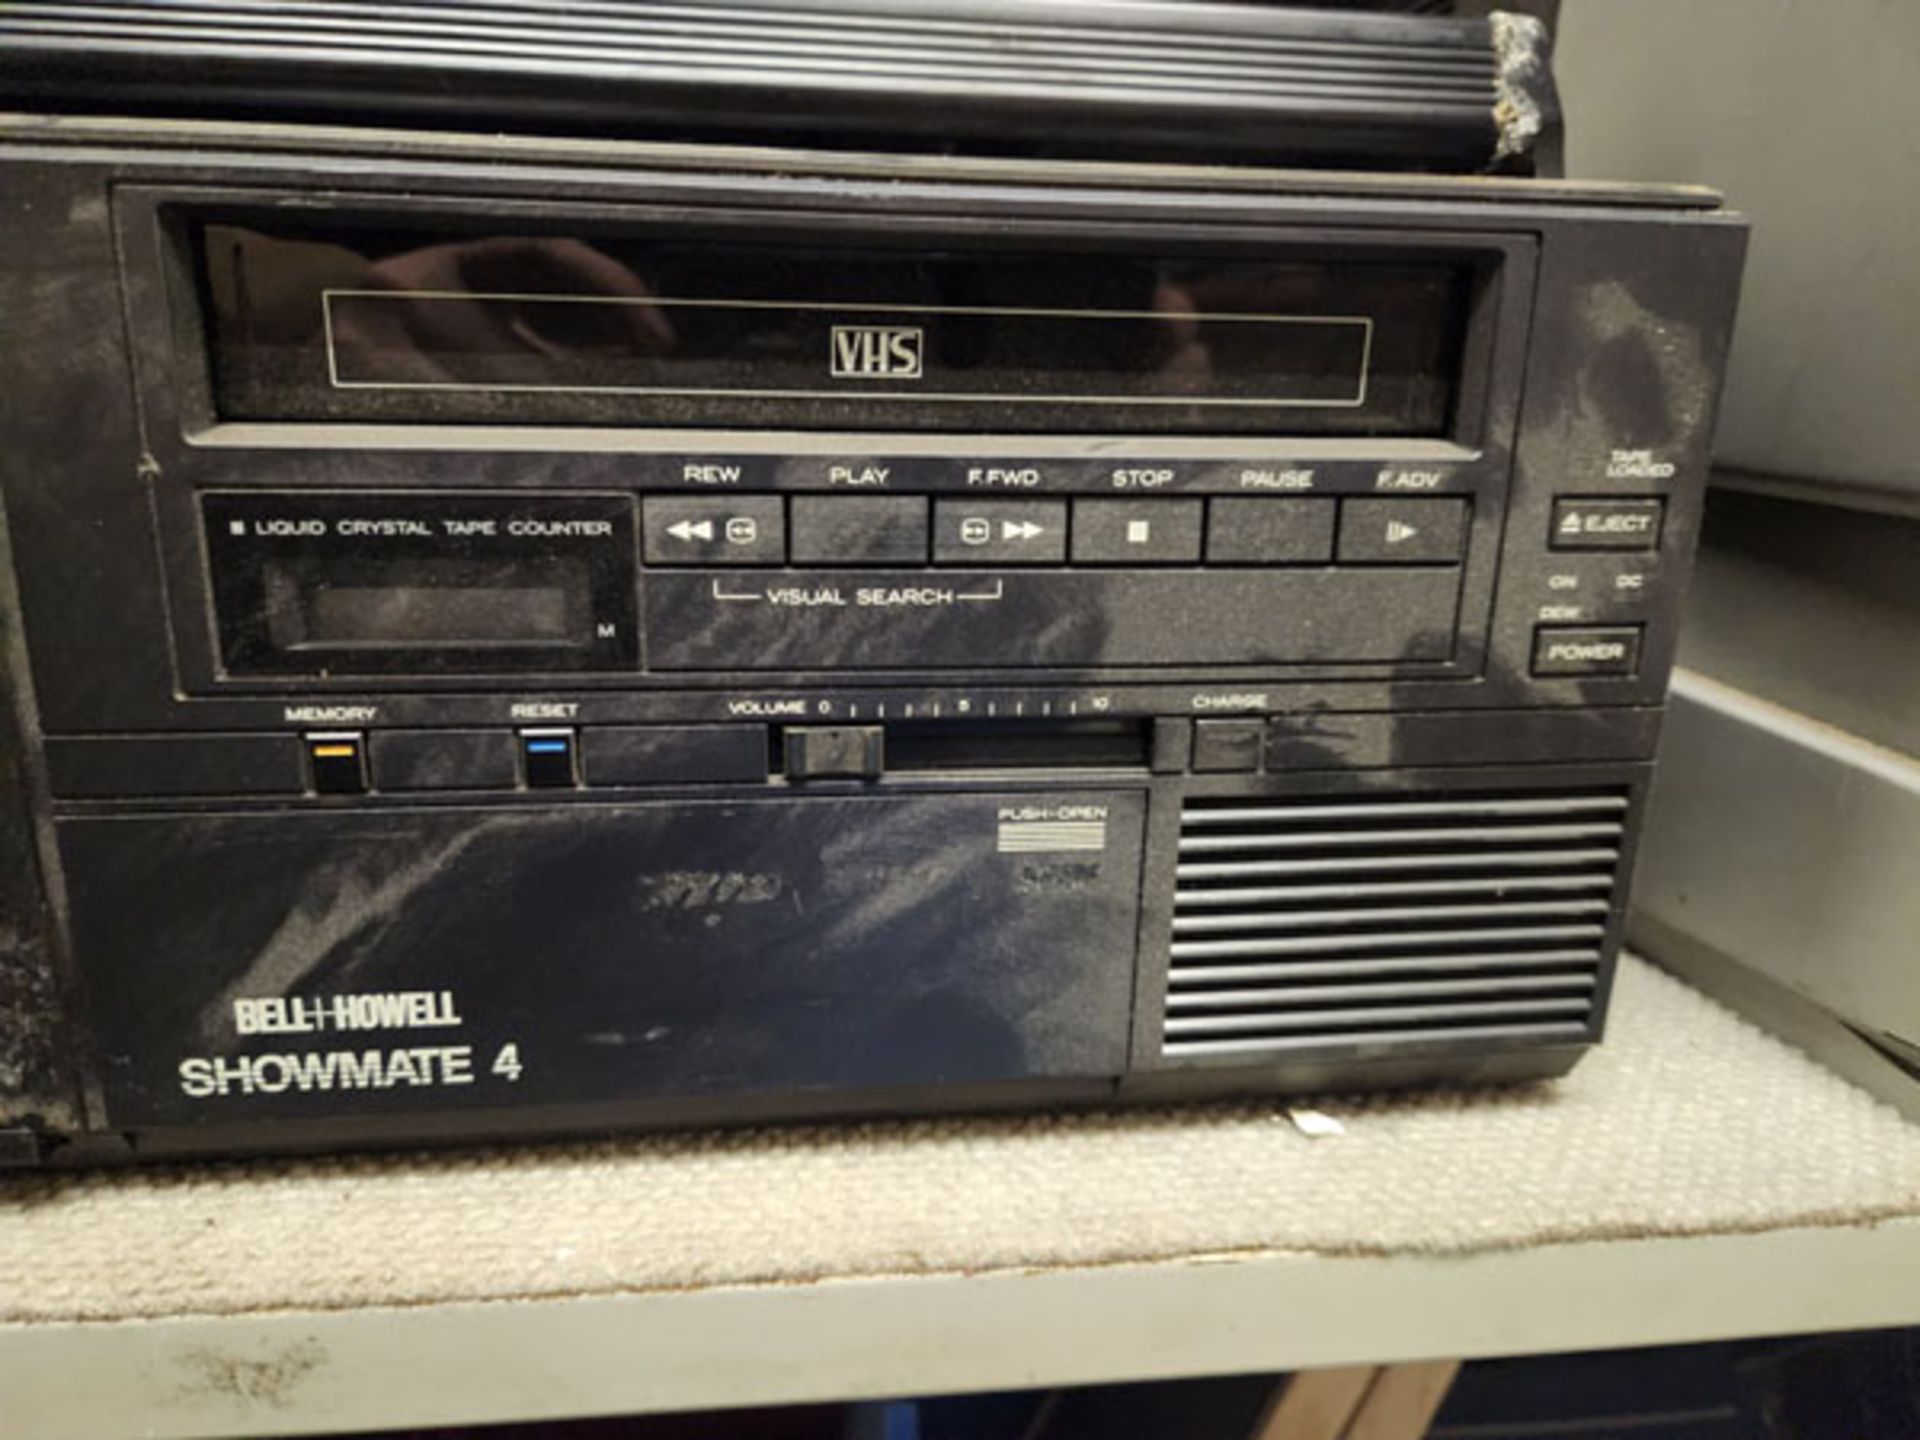 BELL AND HOWELL SHOWMATE 4 VCR AND TELEVISION MODEL 6430 - Image 3 of 6